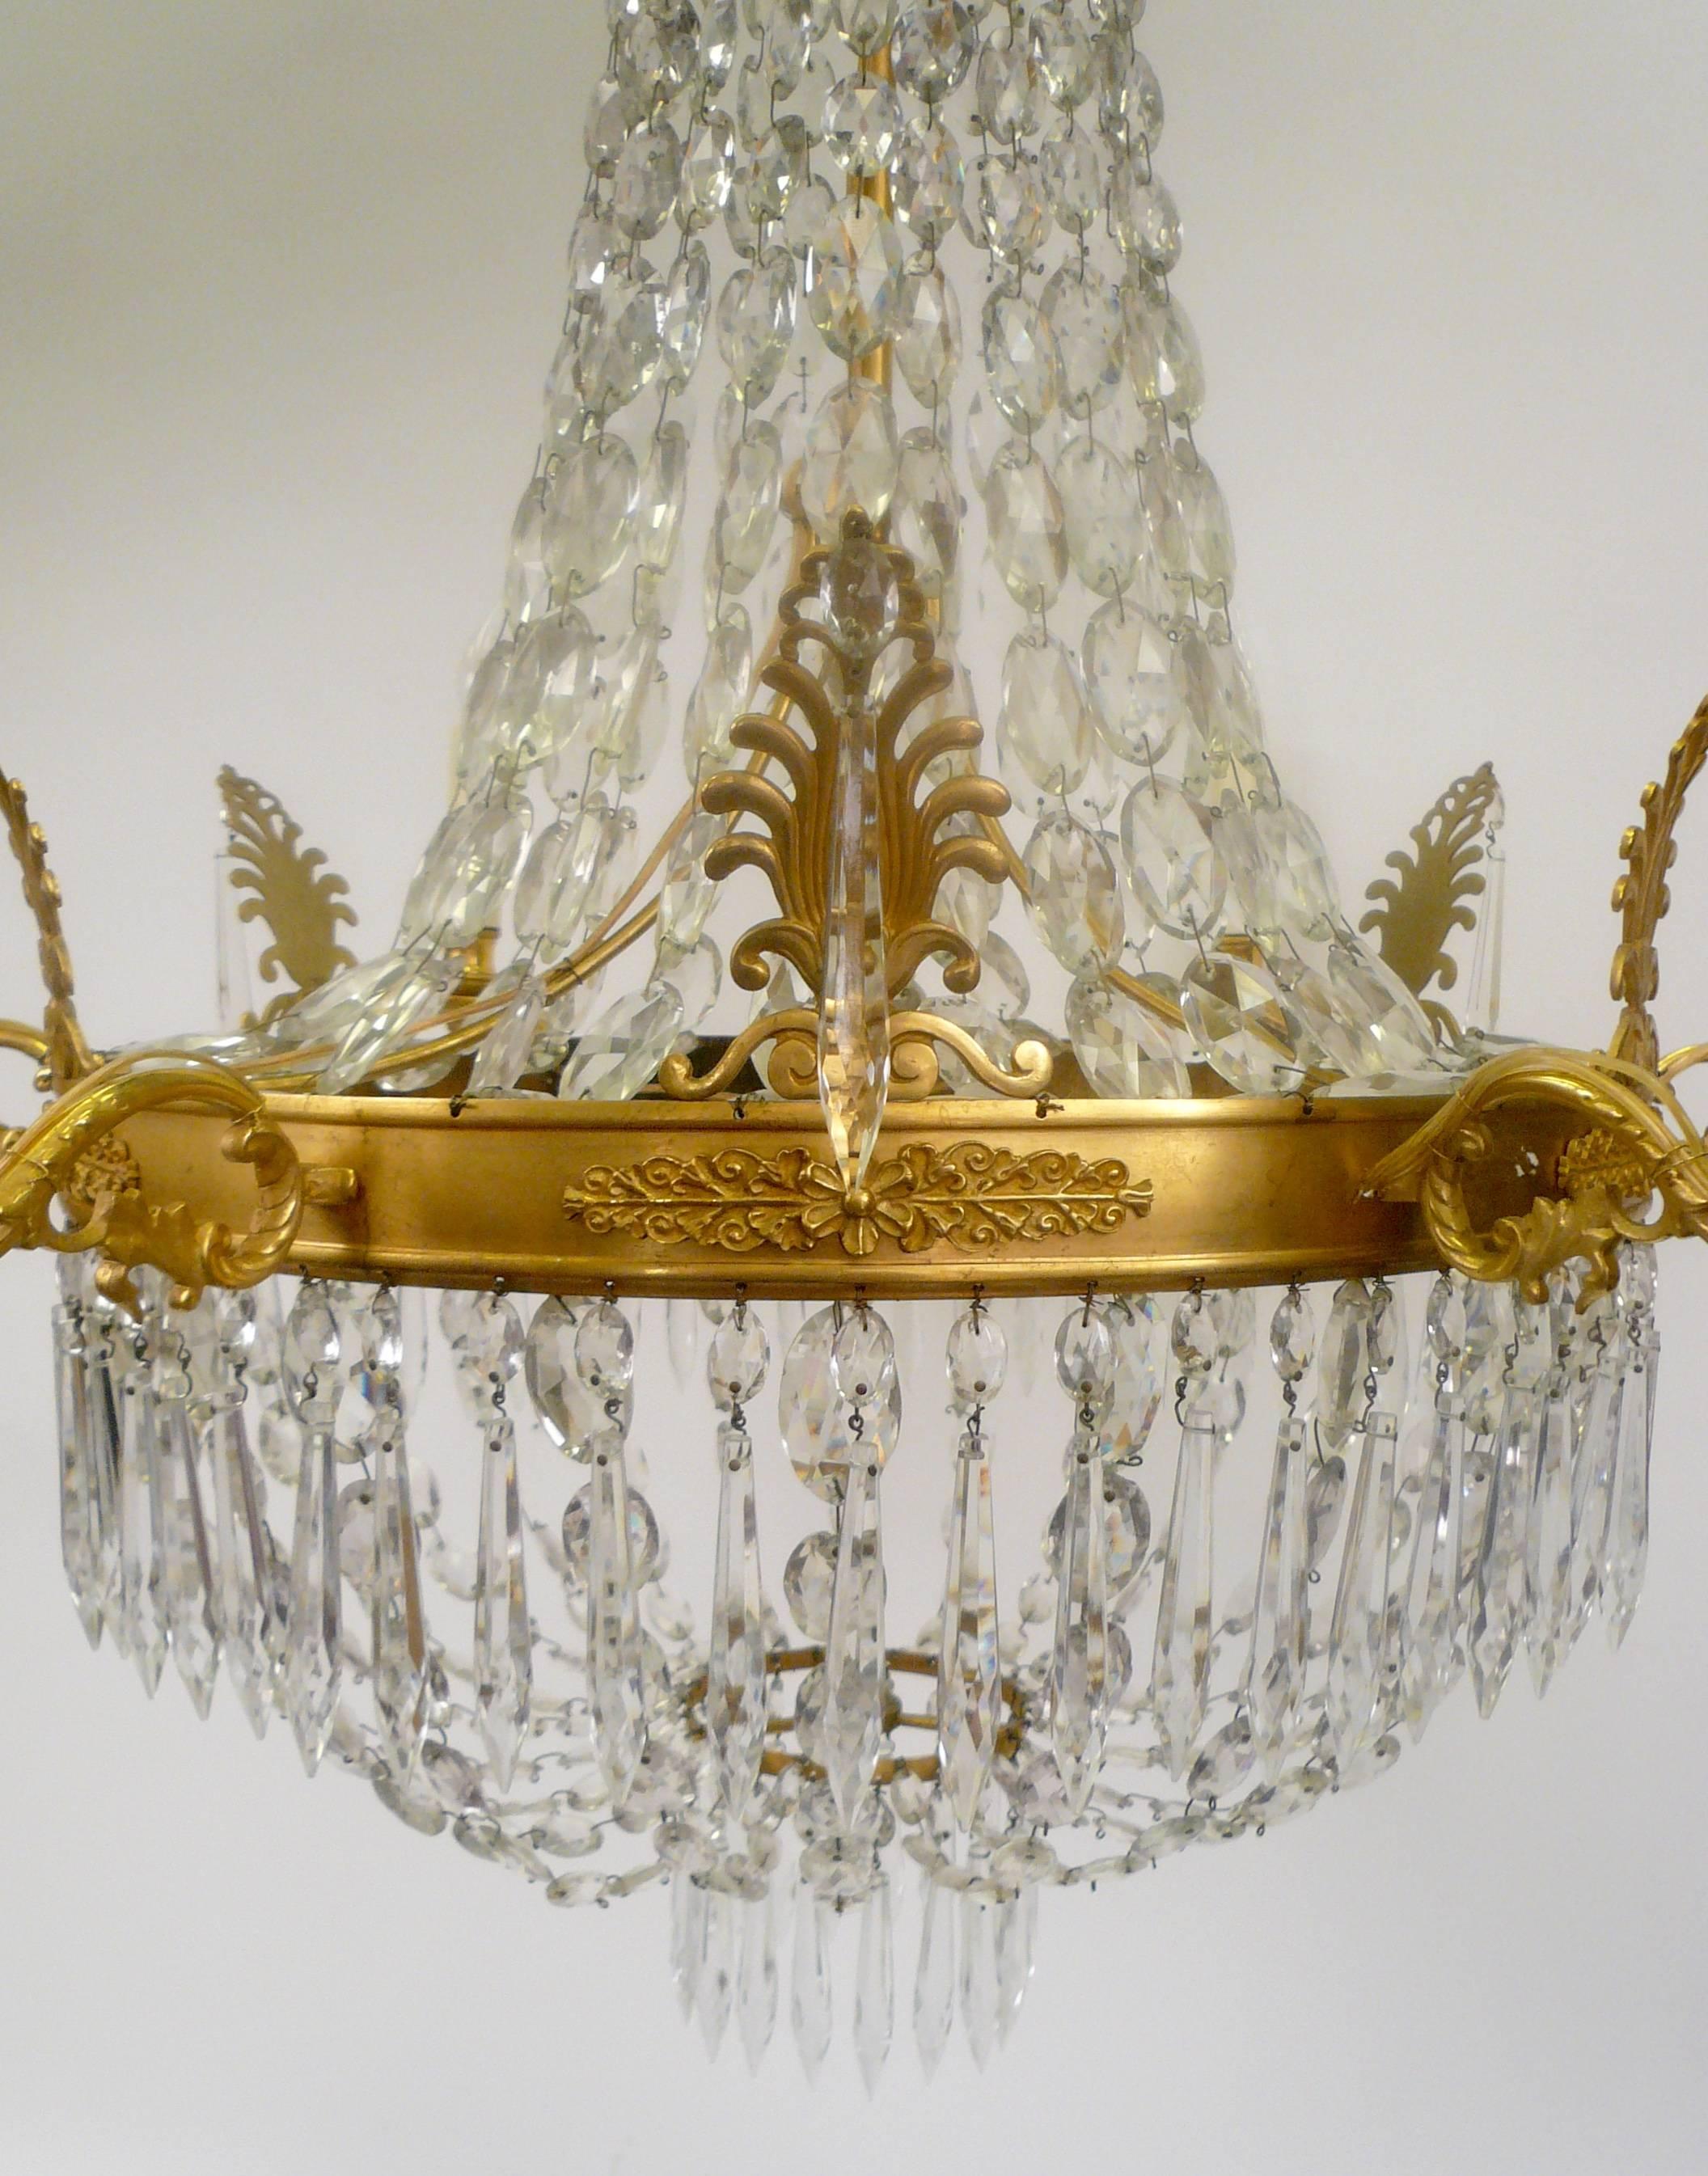 20th Century Gilt Bronze and Crystal Empire Style Chandelier